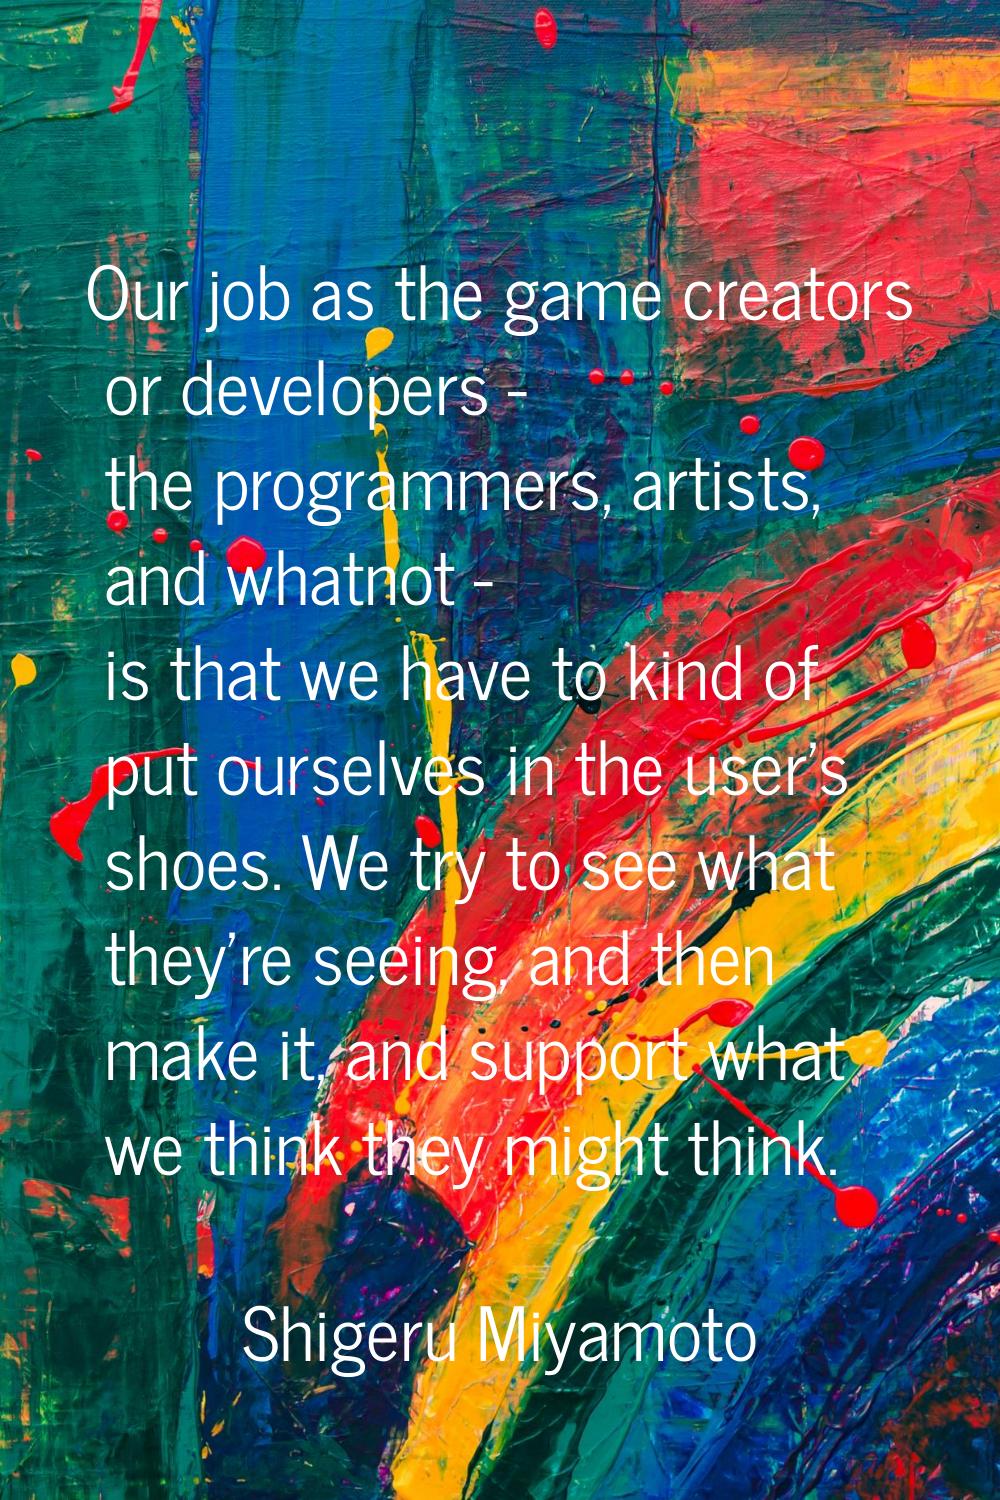 Our job as the game creators or developers - the programmers, artists, and whatnot - is that we hav